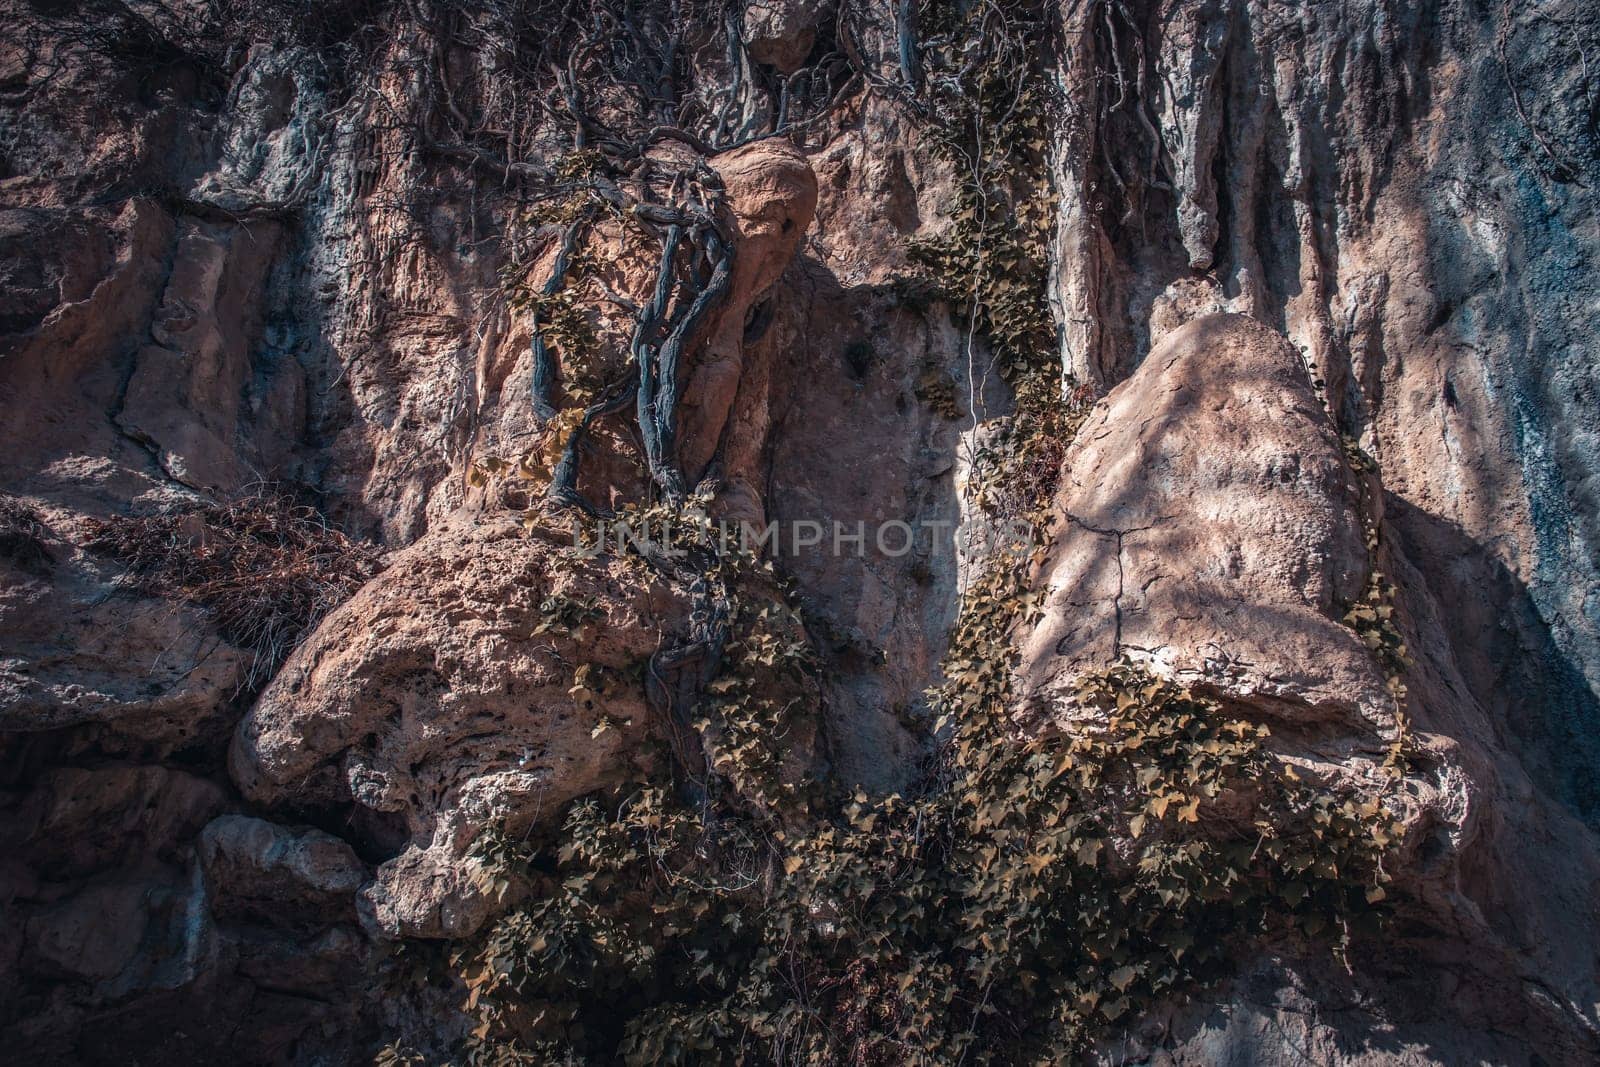 Ivy plant on textured gray wall concept photo. Natural park of Sant Miquel del Fai. Sandstone wall covered with growing vines photography. High quality picture for wallpaper, travel blog.